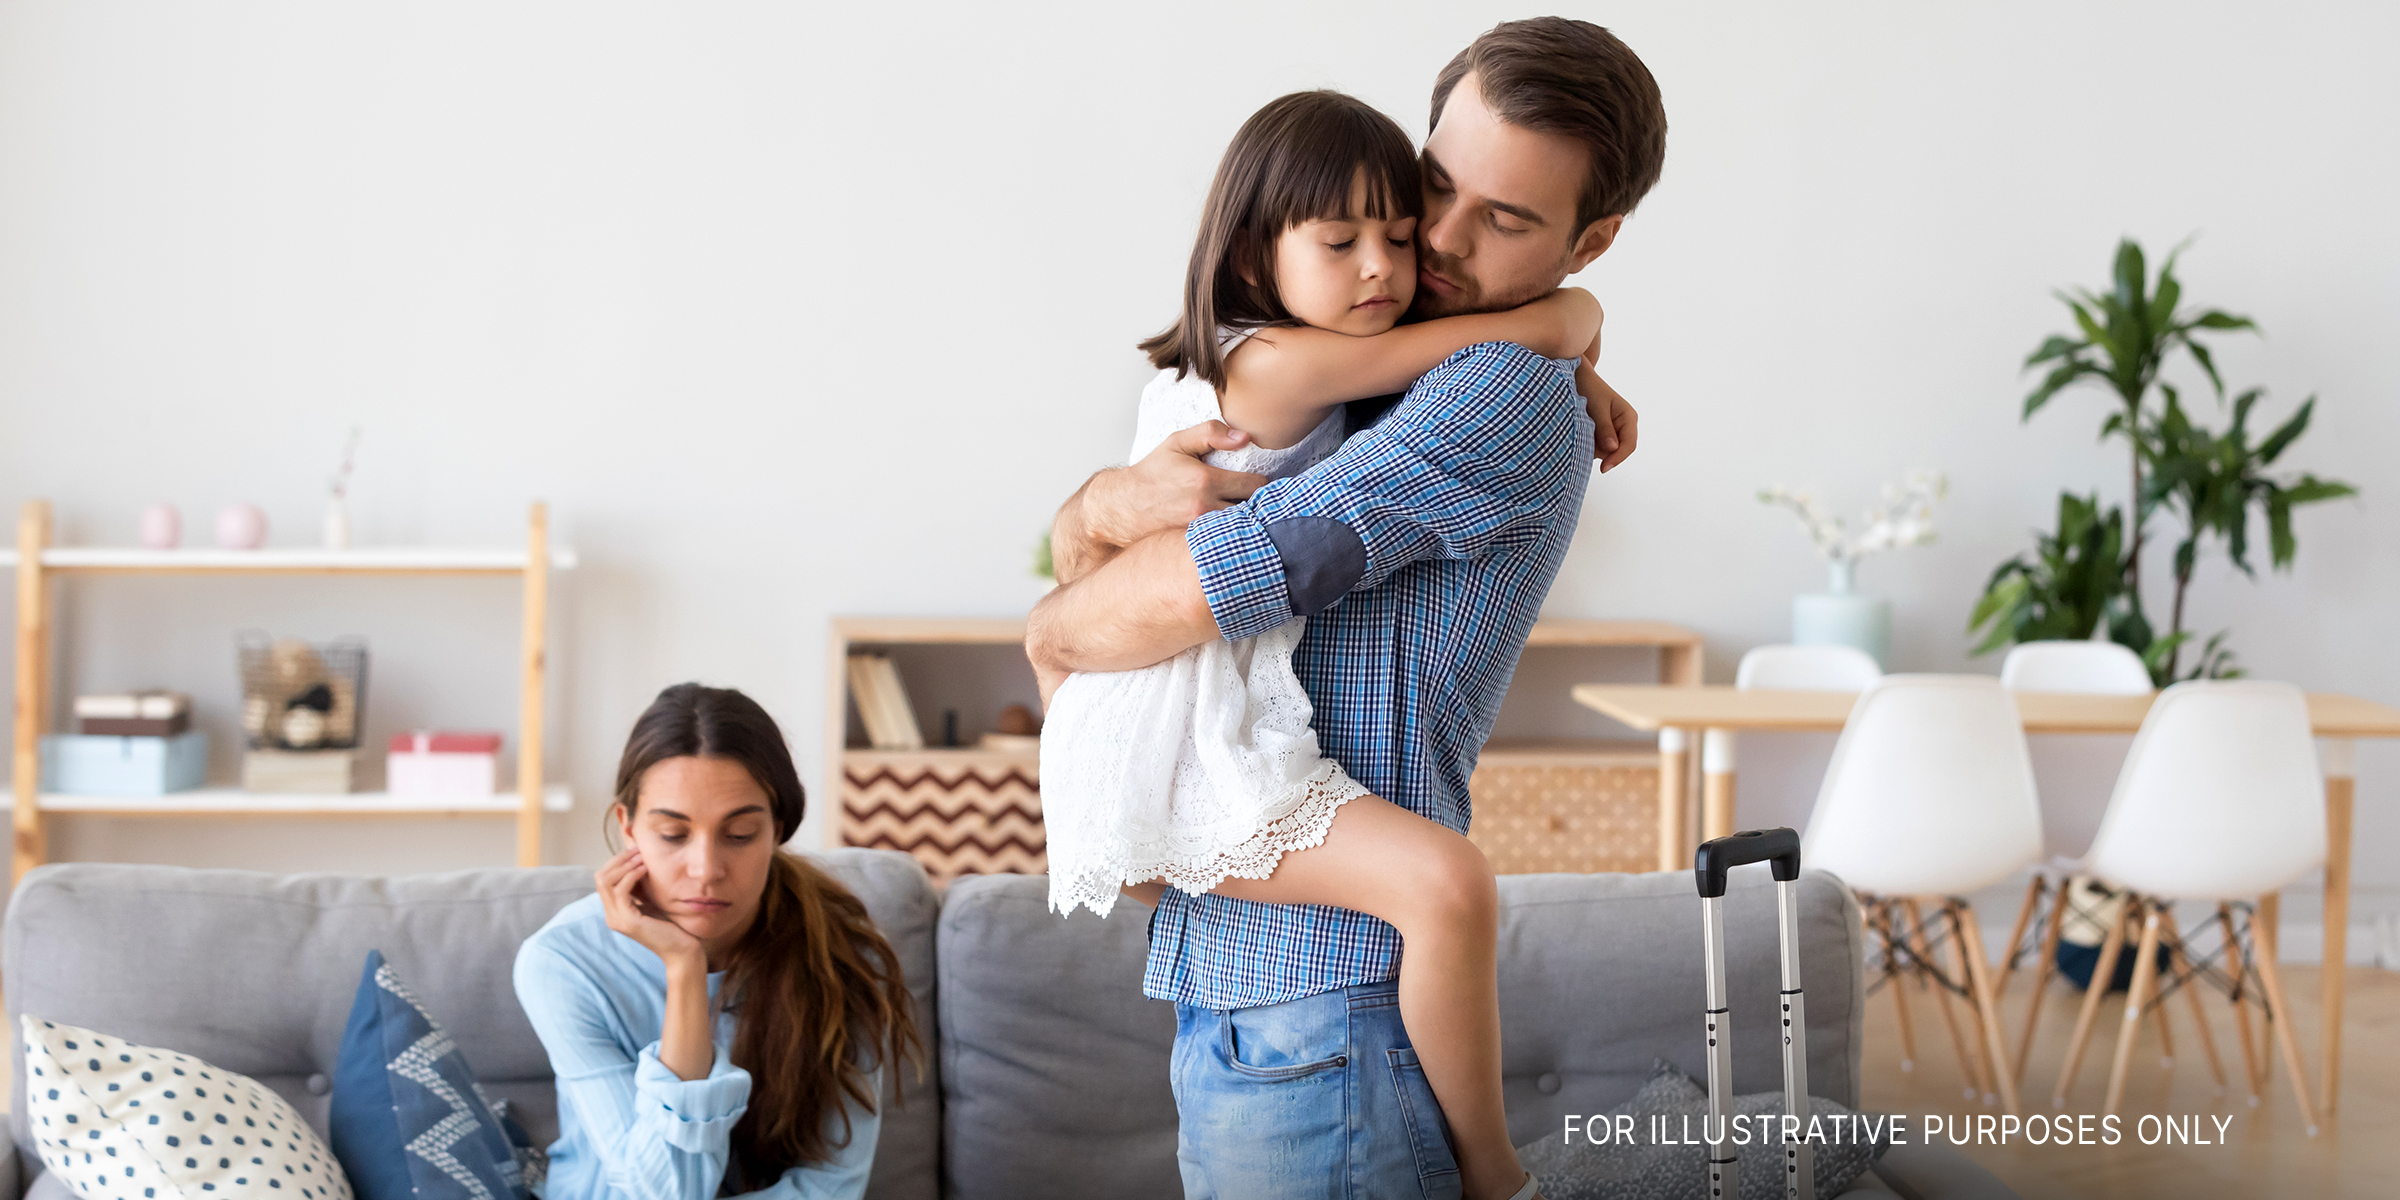 A man holding his young sister with his sad girlfriend in the background | Source: Shutterstock